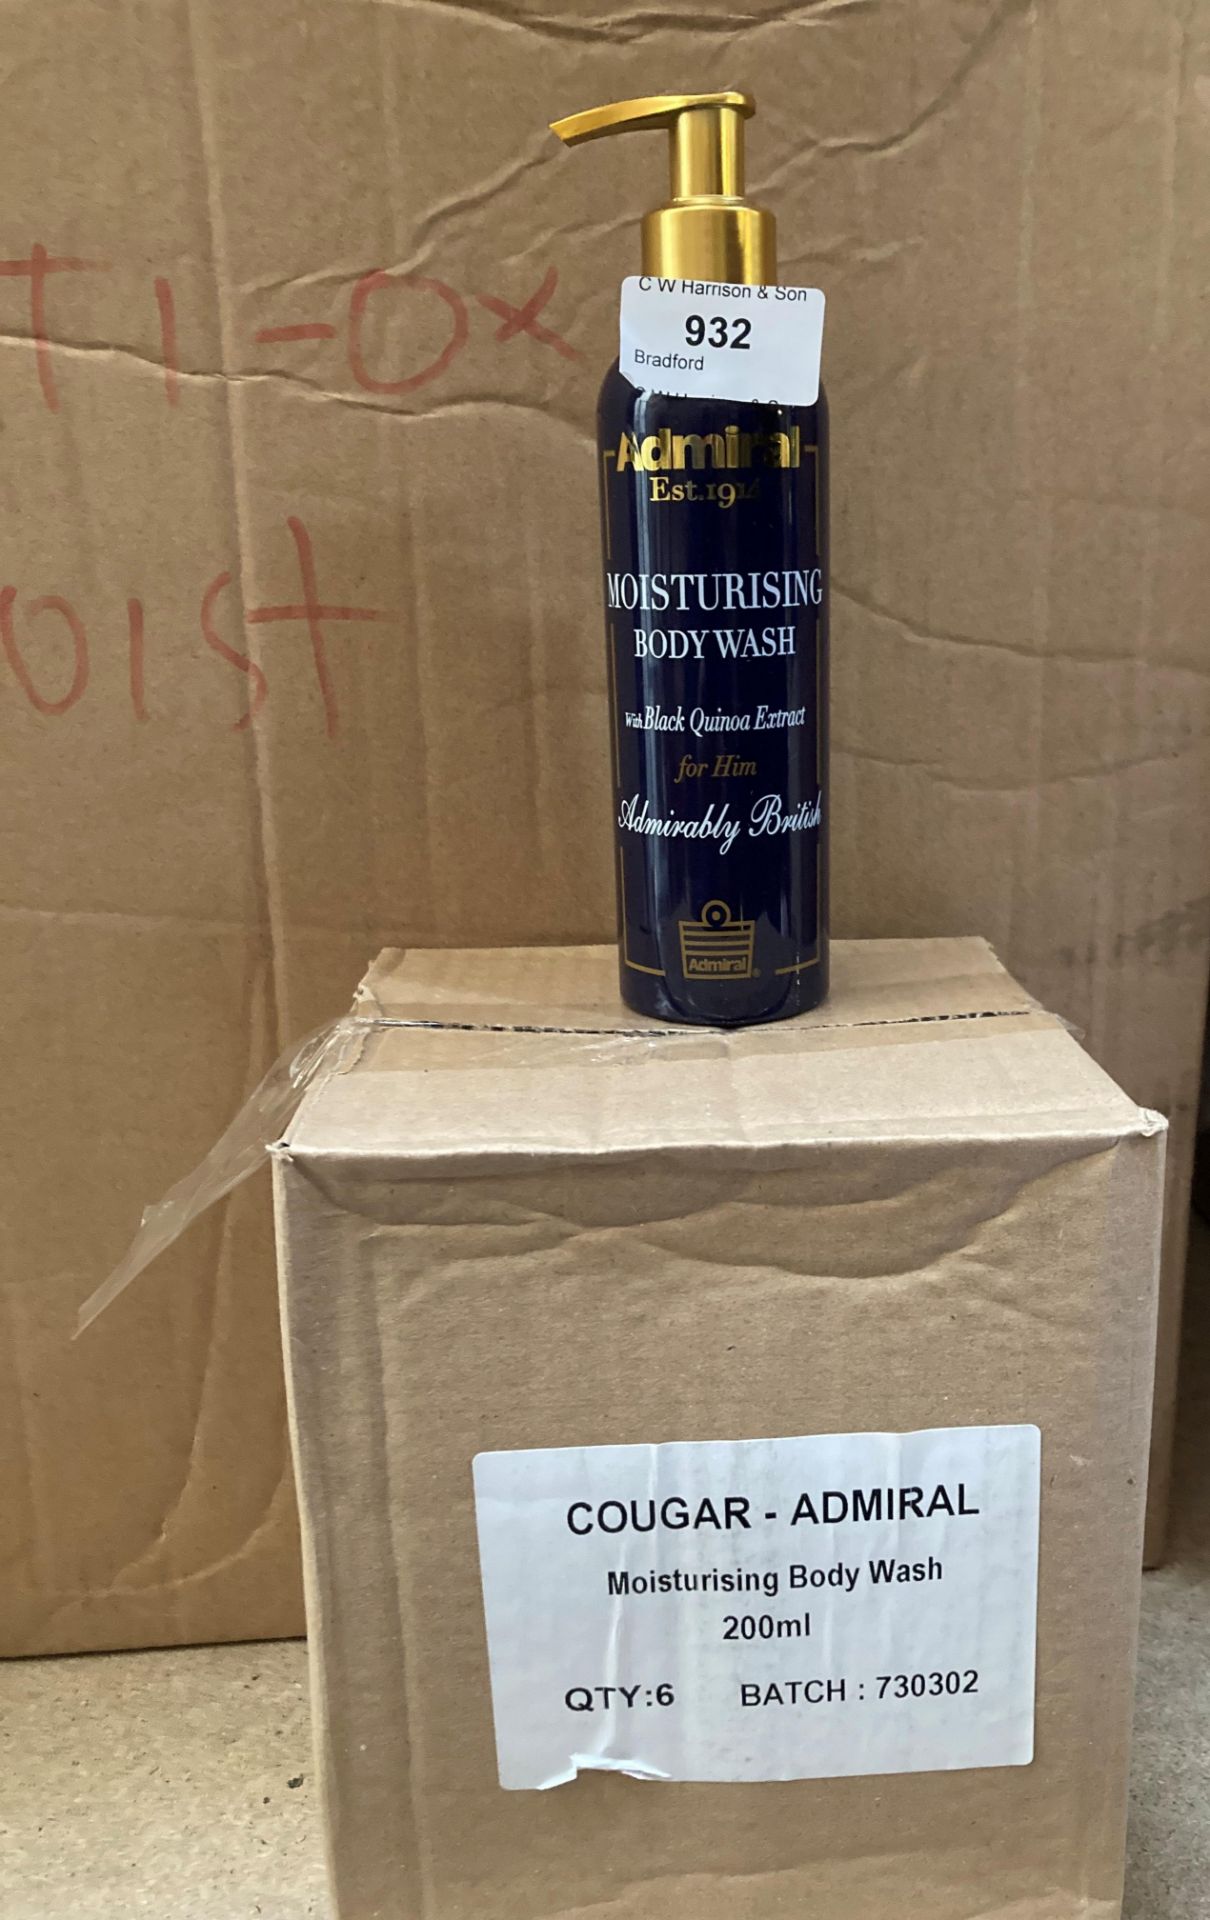 Forty-six boxes of Cougar/Admiral moisturising body wash 200ml (6 units per box)